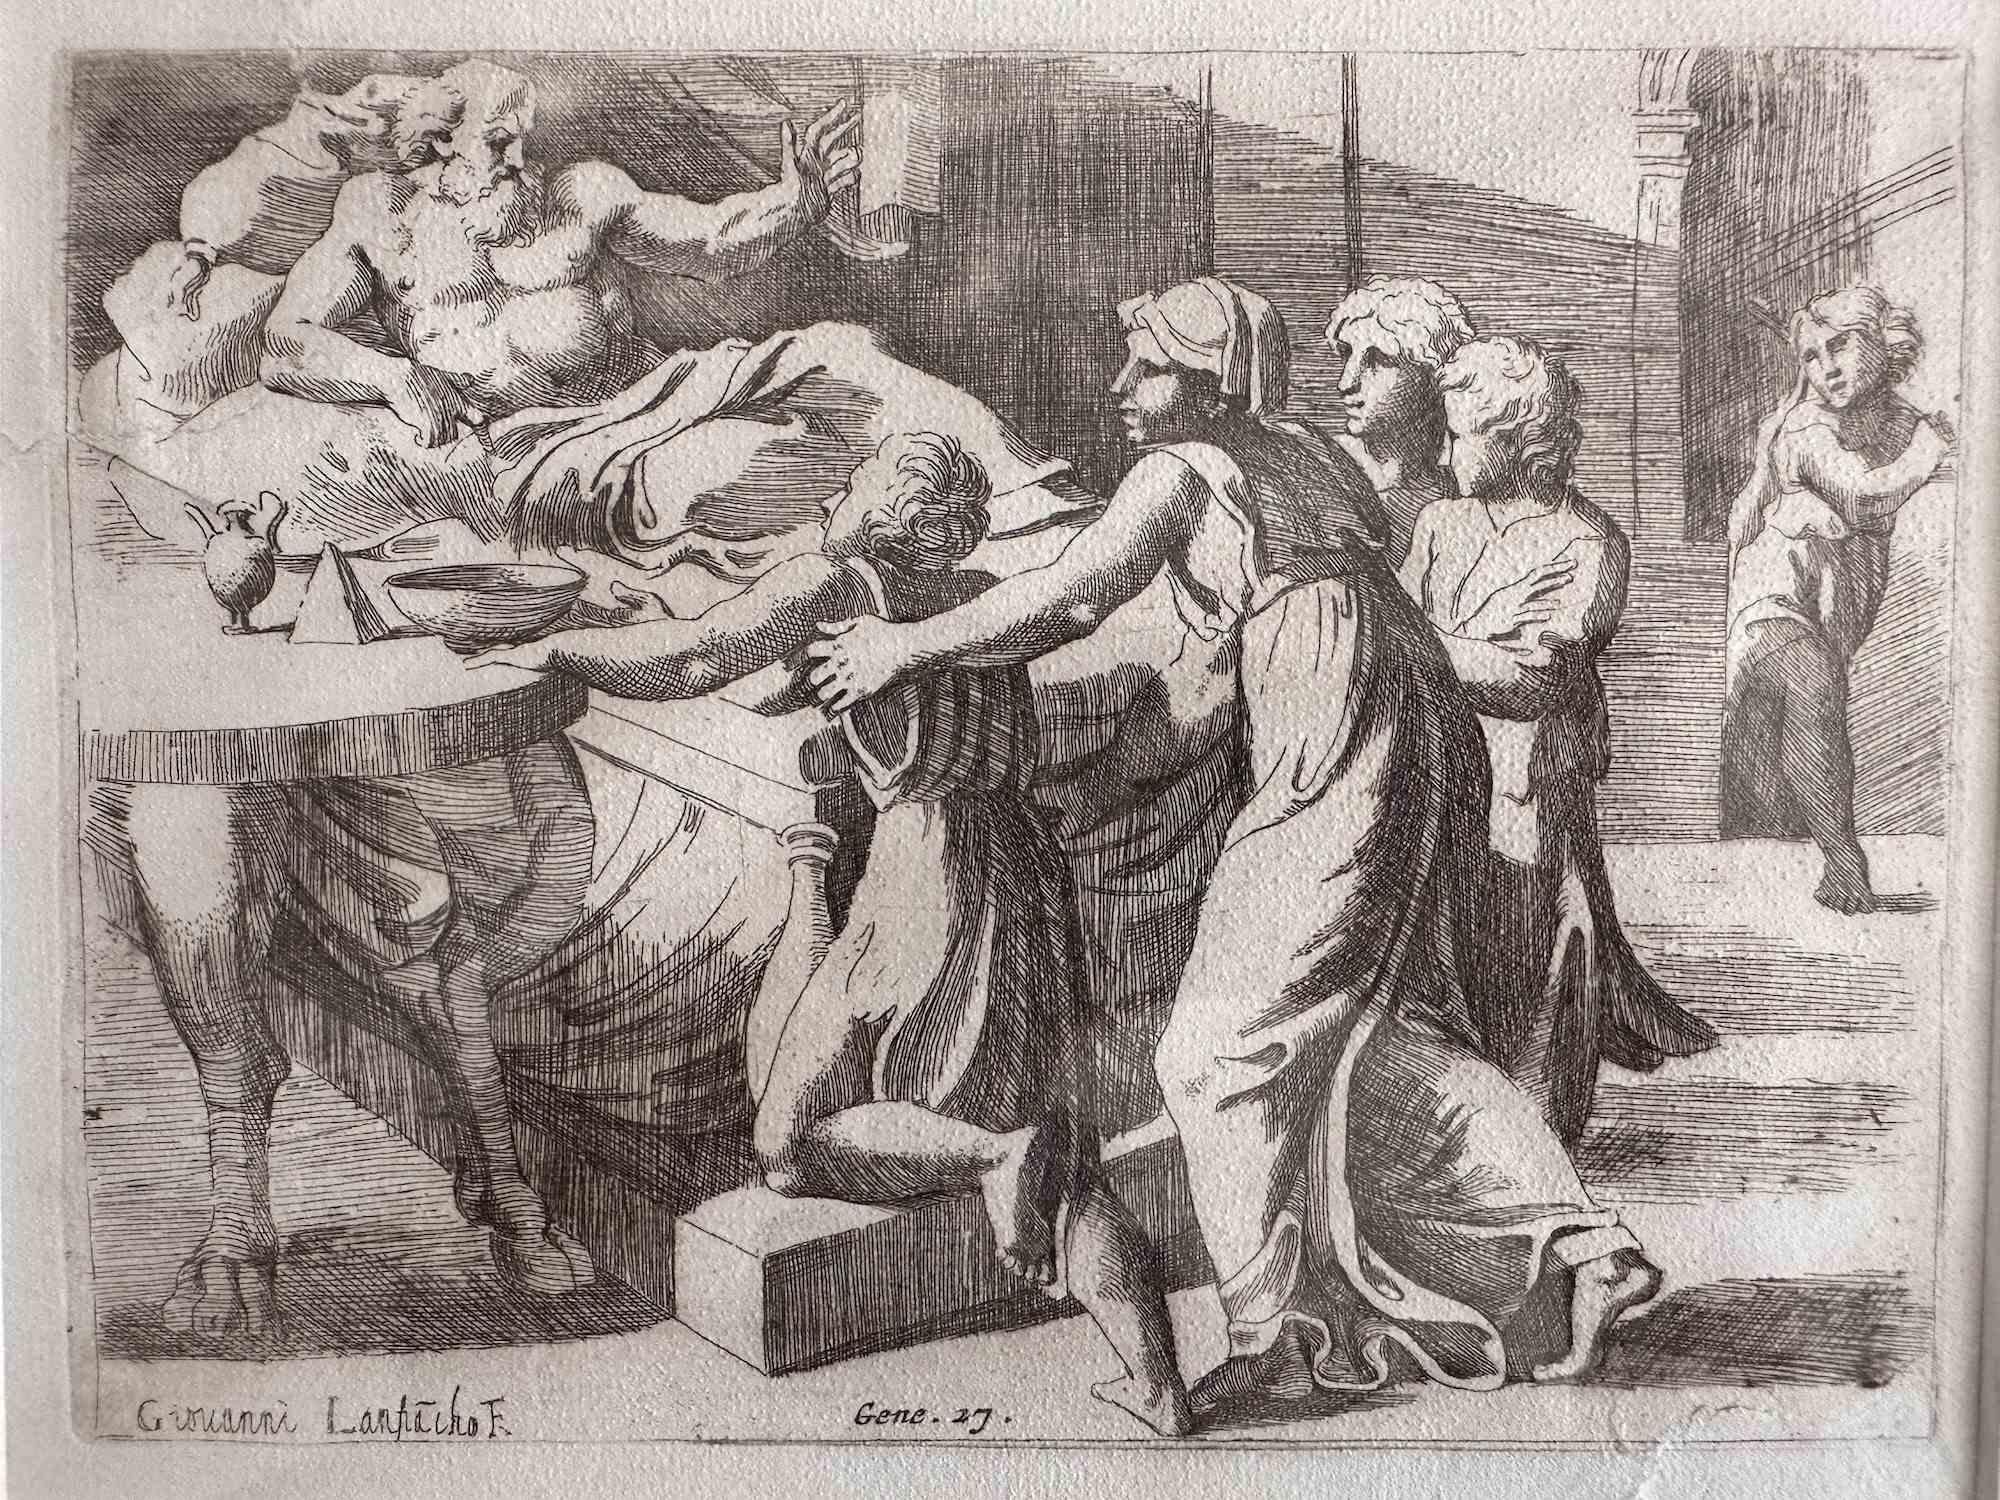 Giovanni Lanfranco (Terenzo, 1582 - Rome, 1647) Figurative Print - Genesis 27 - Old Testament Story - Etching by Giovanni Lanfranco - 1607